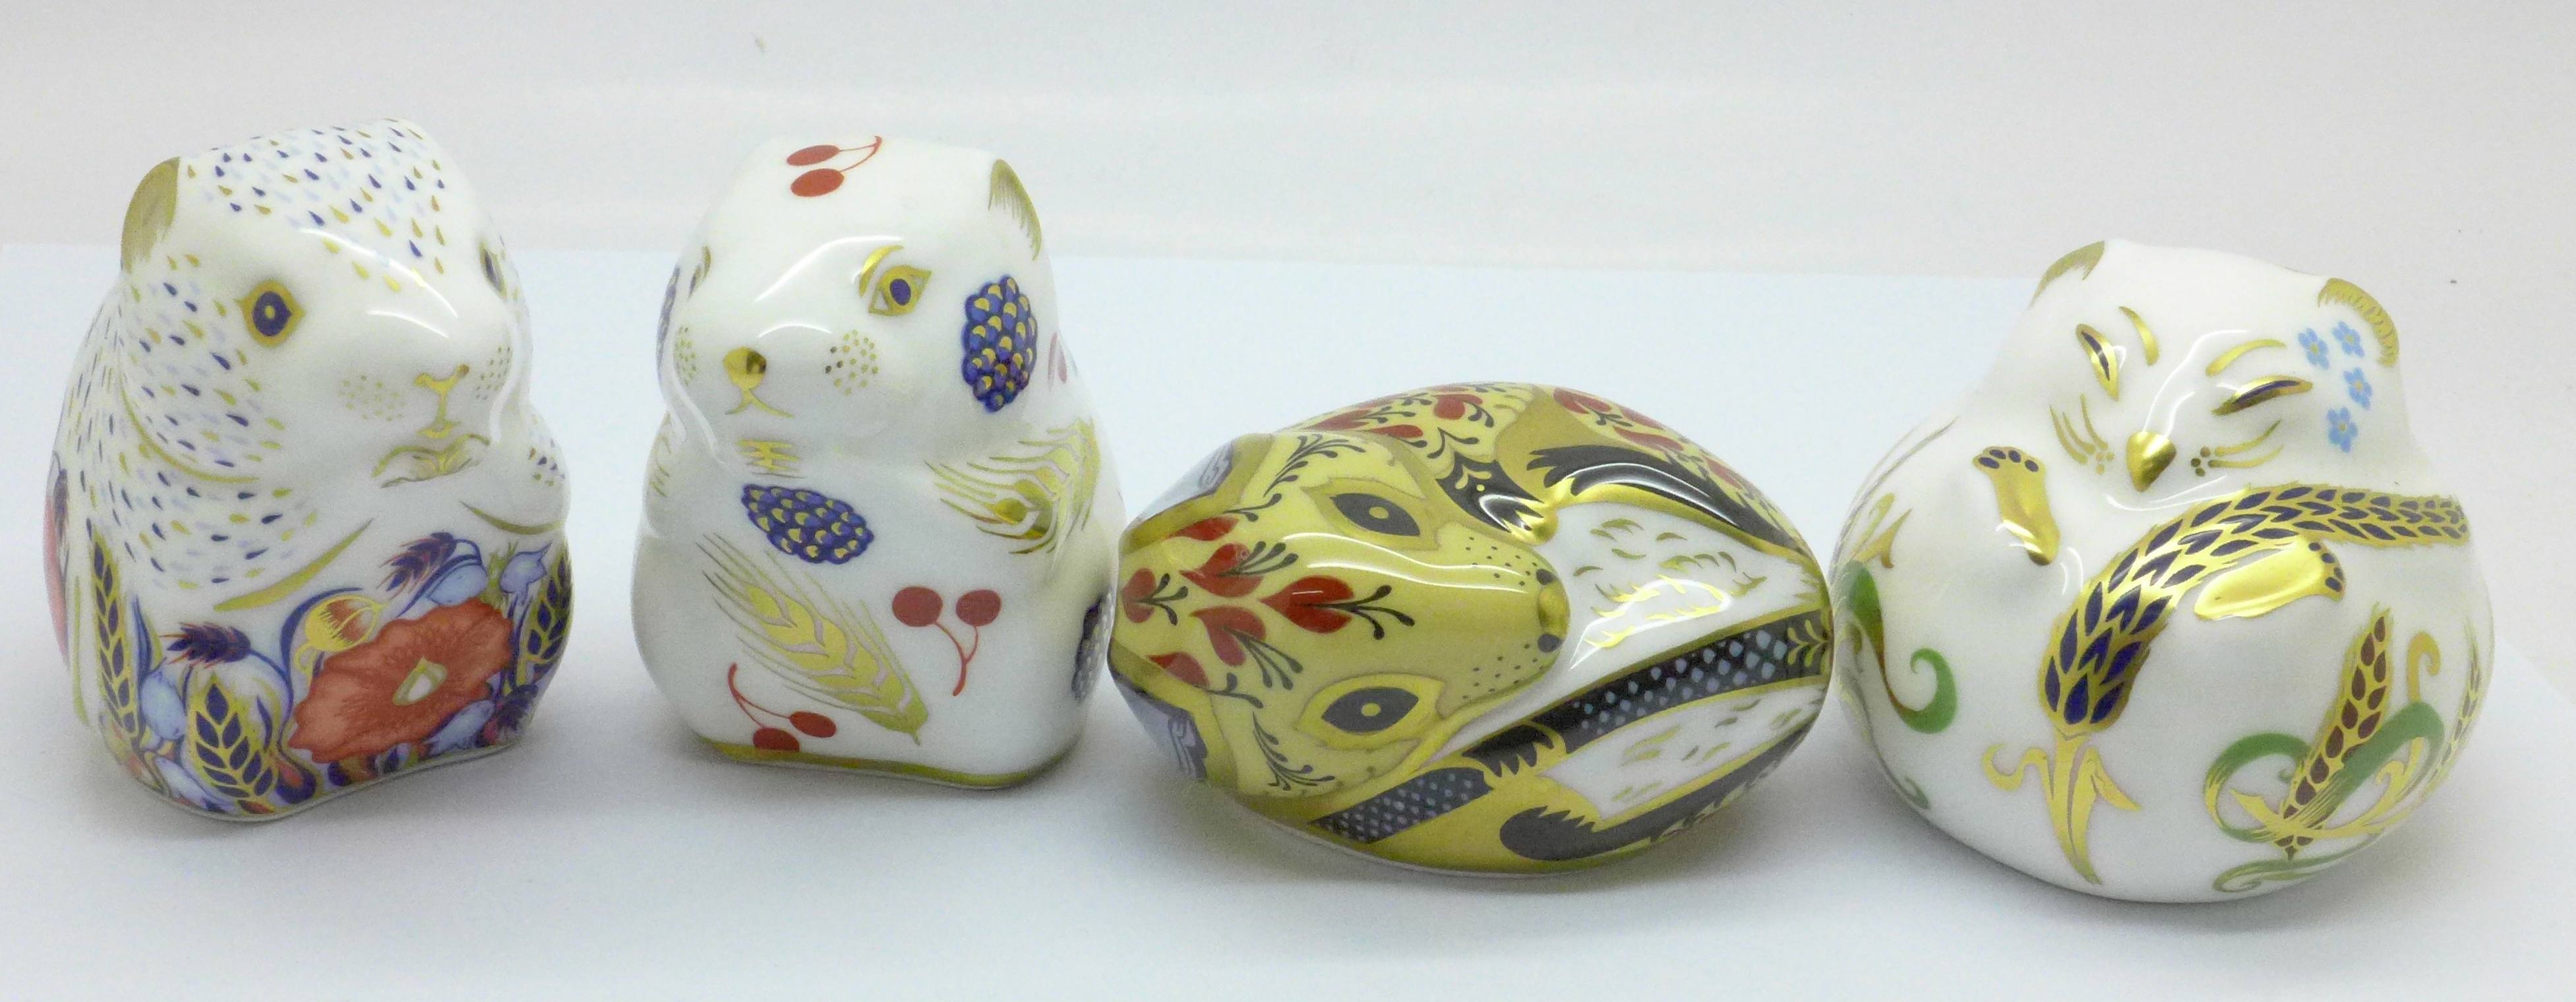 Four Royal Crown Derby paperweights, Poppy Mouse, Country Mouse, Sleeping Dormouse and Harvest